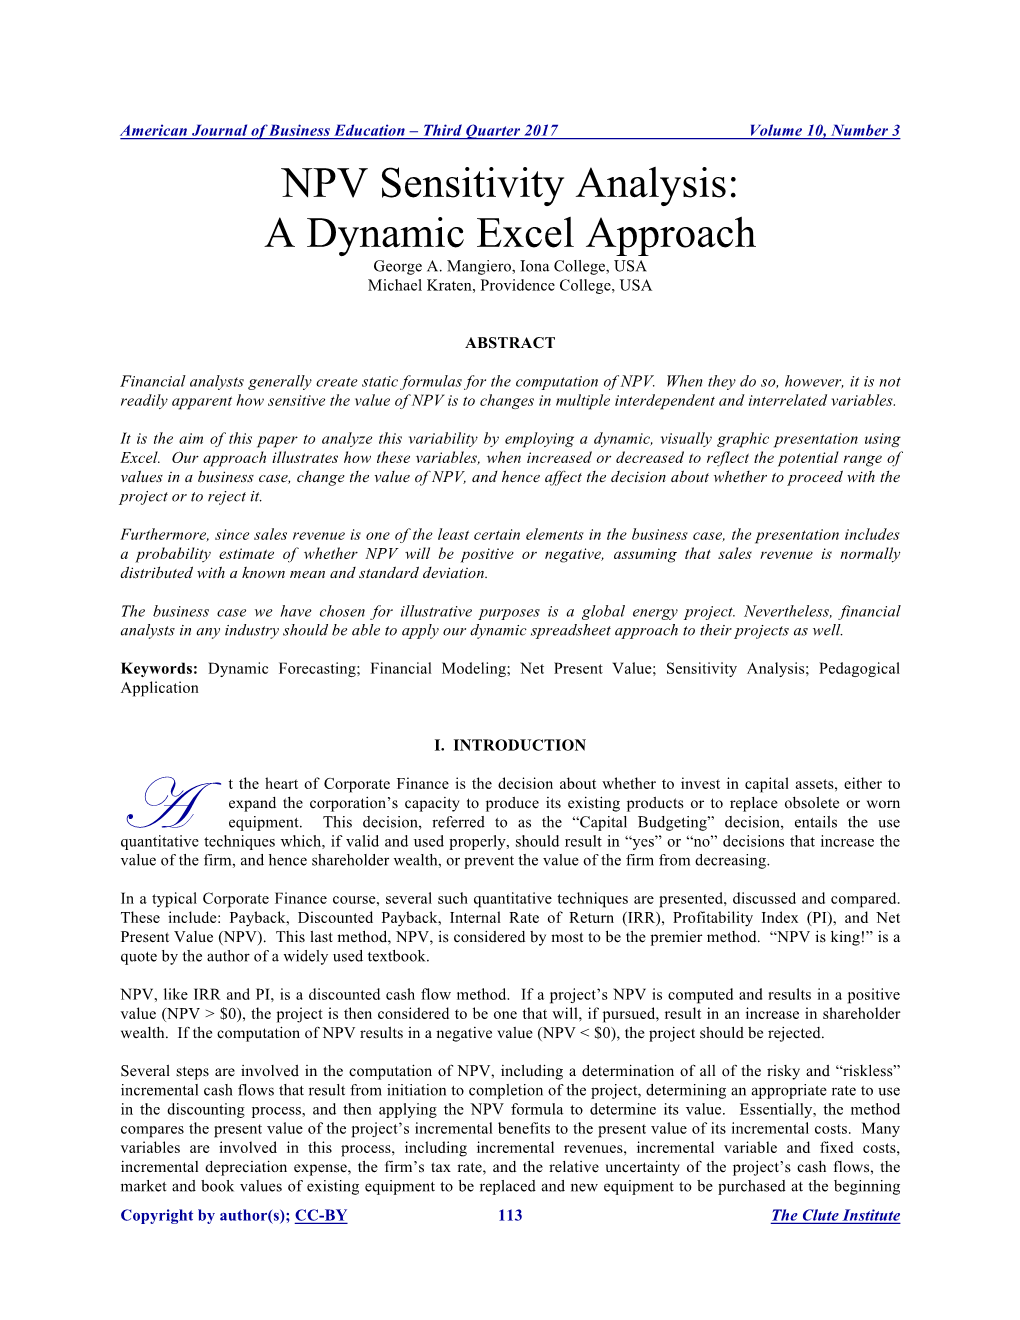 NPV Sensitivity Analysis: a Dynamic Excel Approach George A